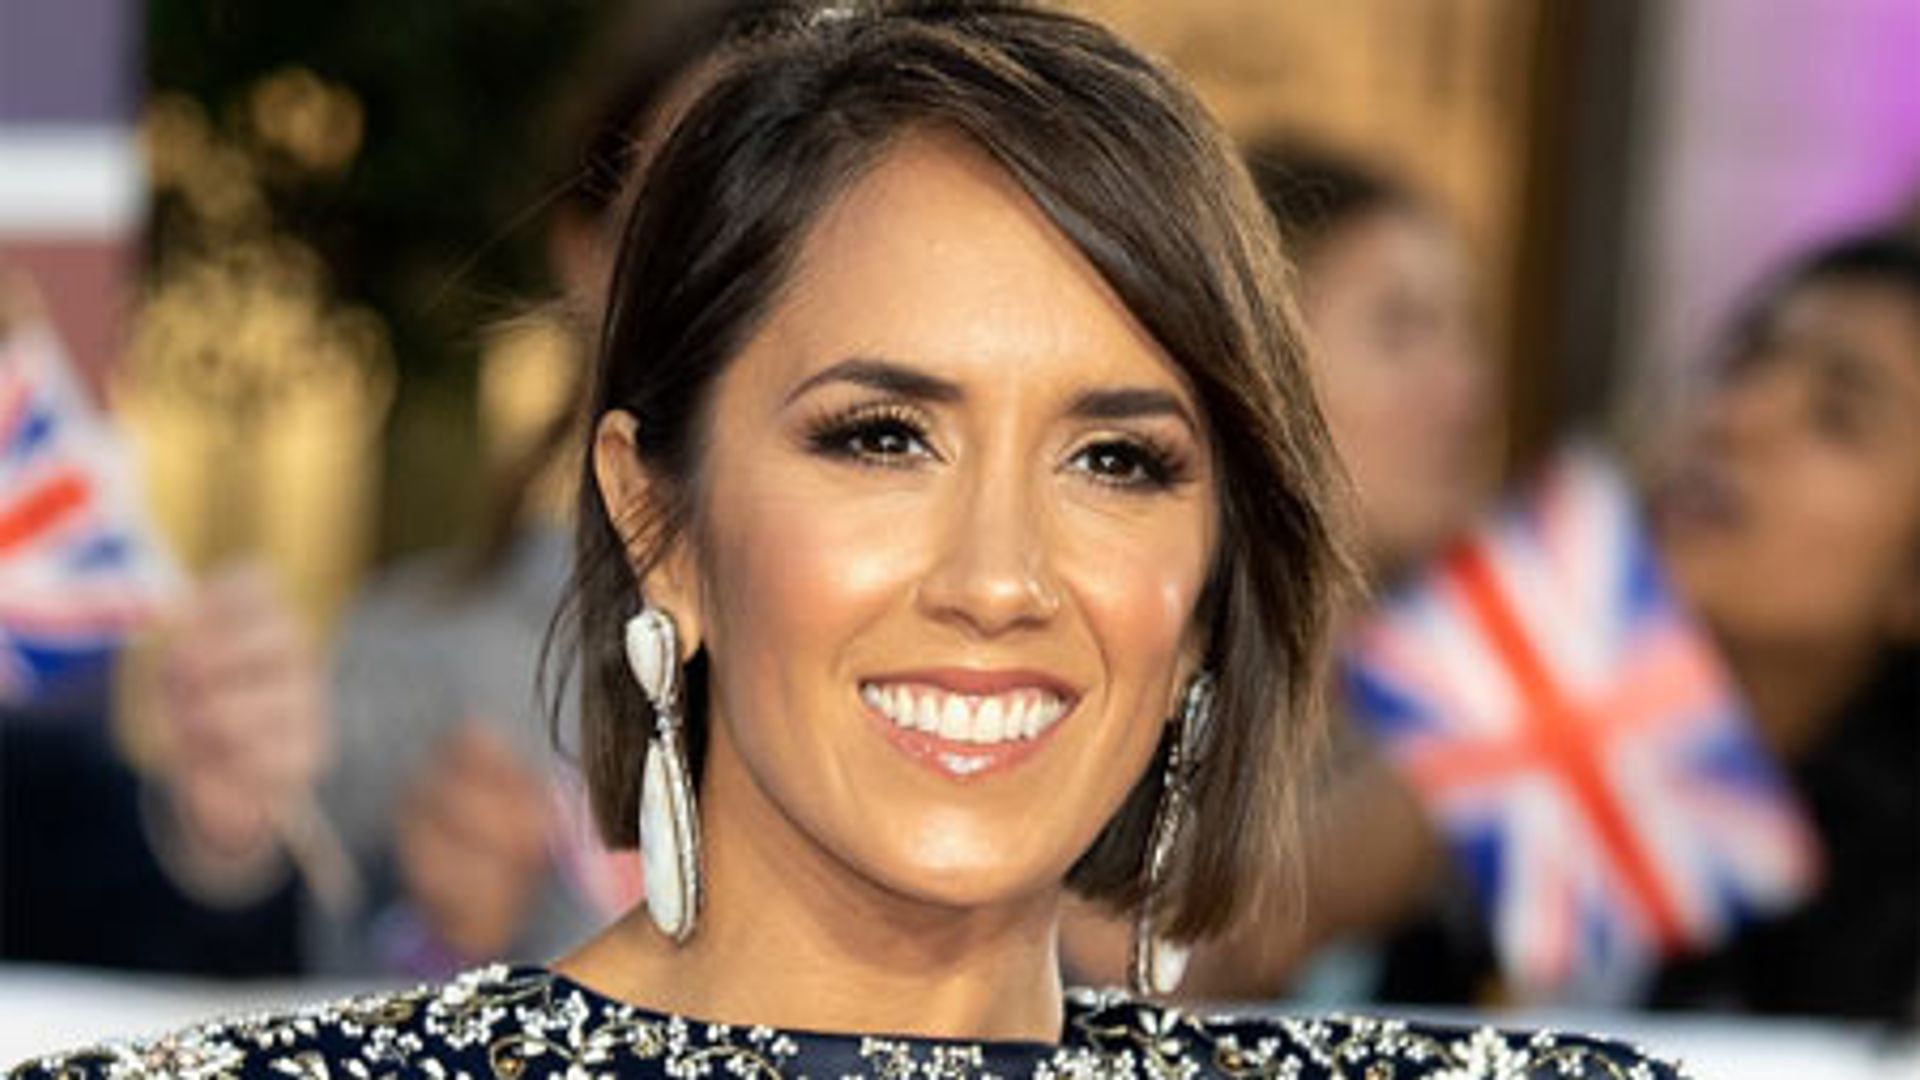 Janette Manrara shows off lavish bathroom in new home ahead of welcoming baby